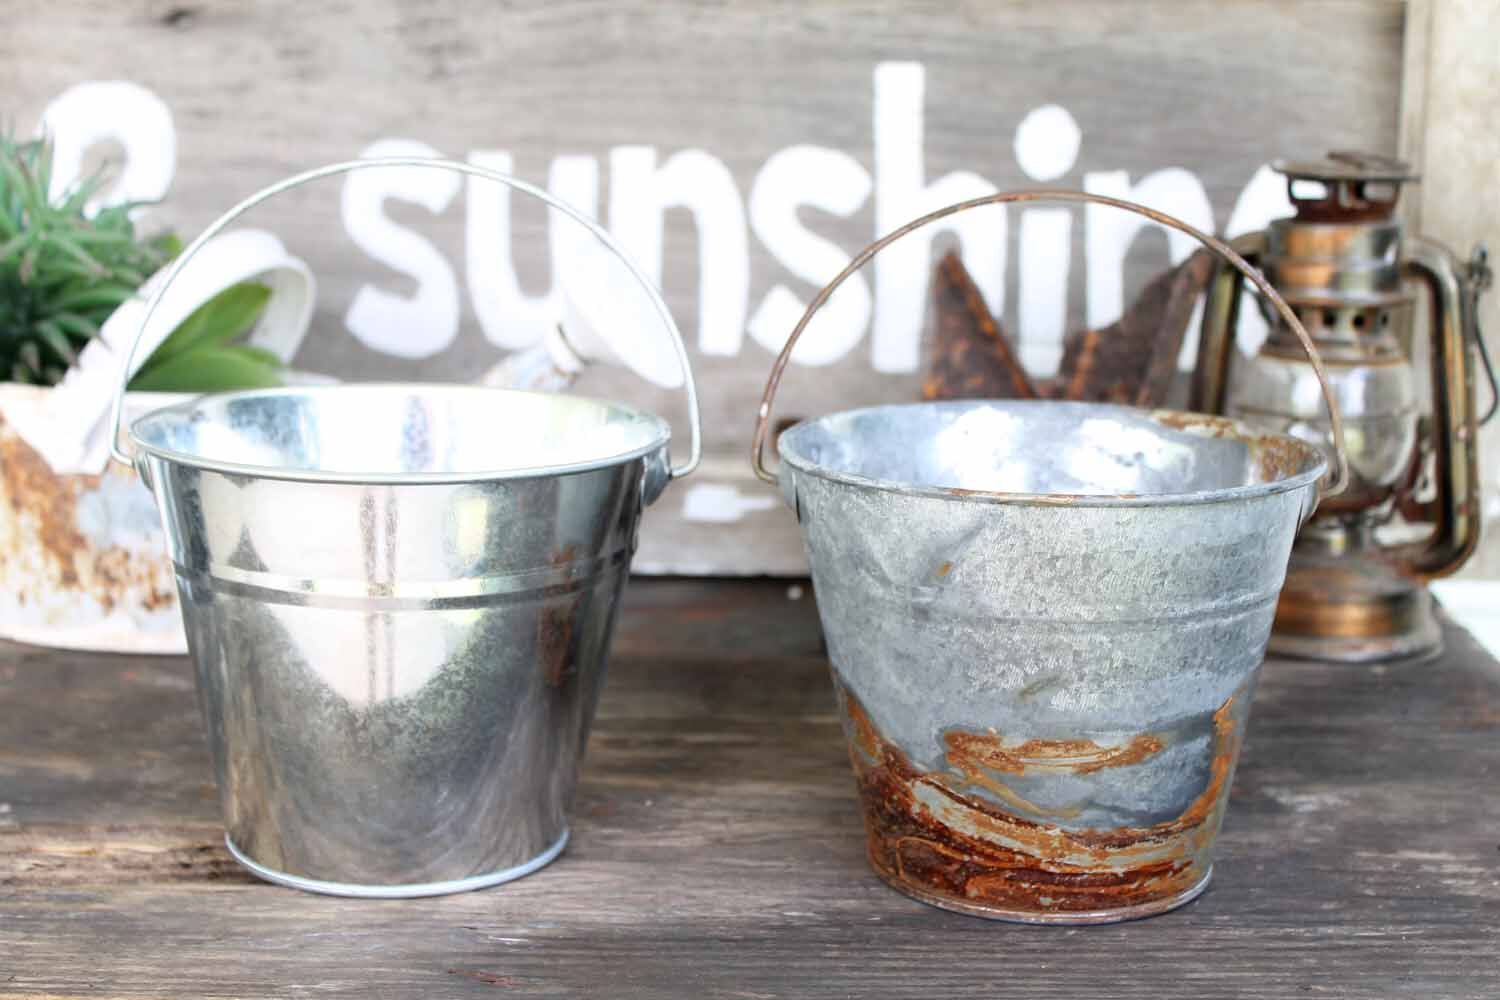 Shiny metal is transformed in to rustic beauties